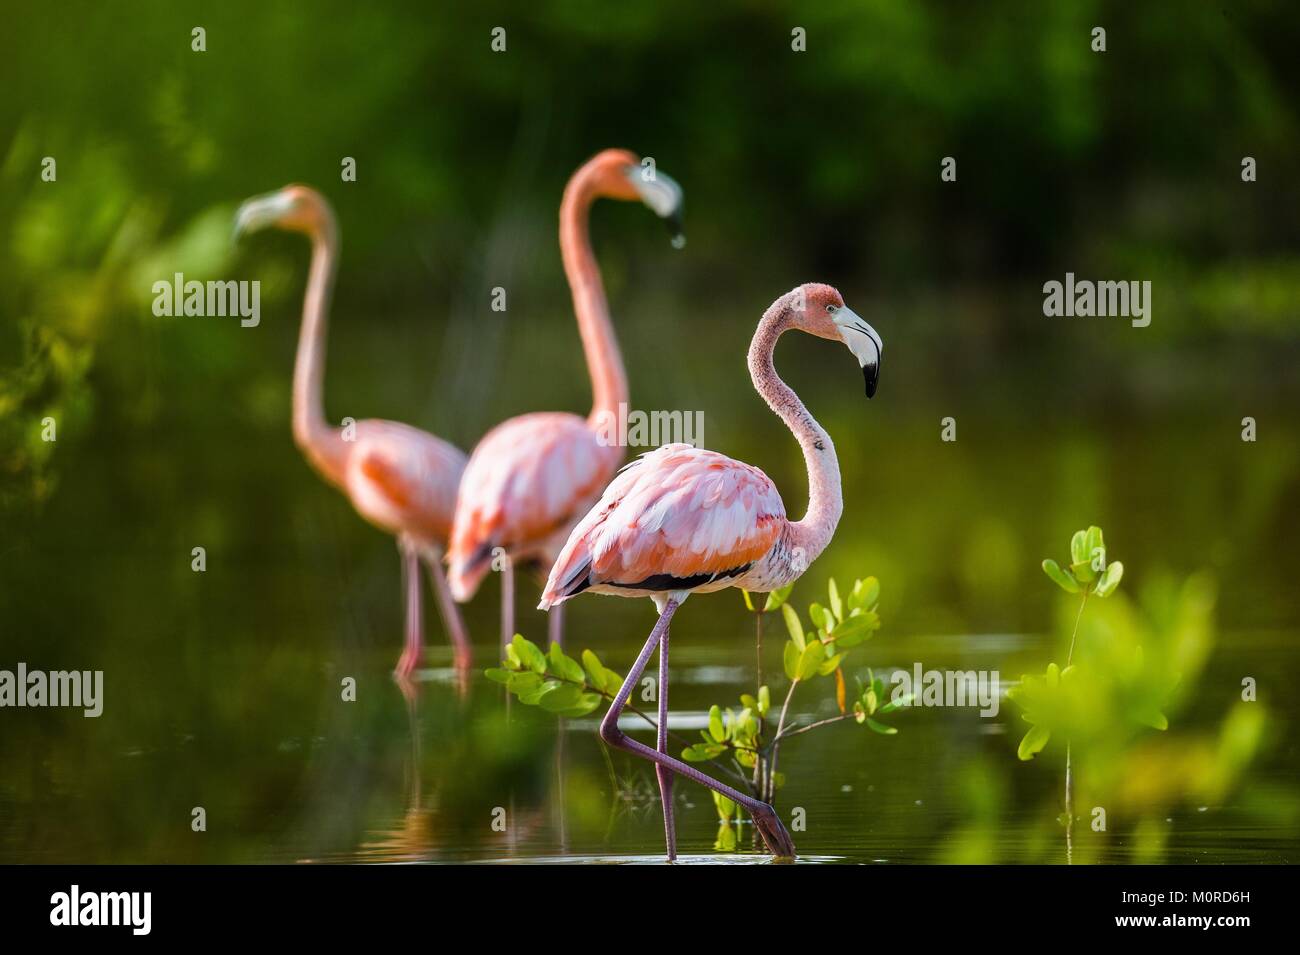 Mating dance Caribbean flamingos ( Phoenicopterus ruber ruber ) on pond in Cuba. Stock Photo